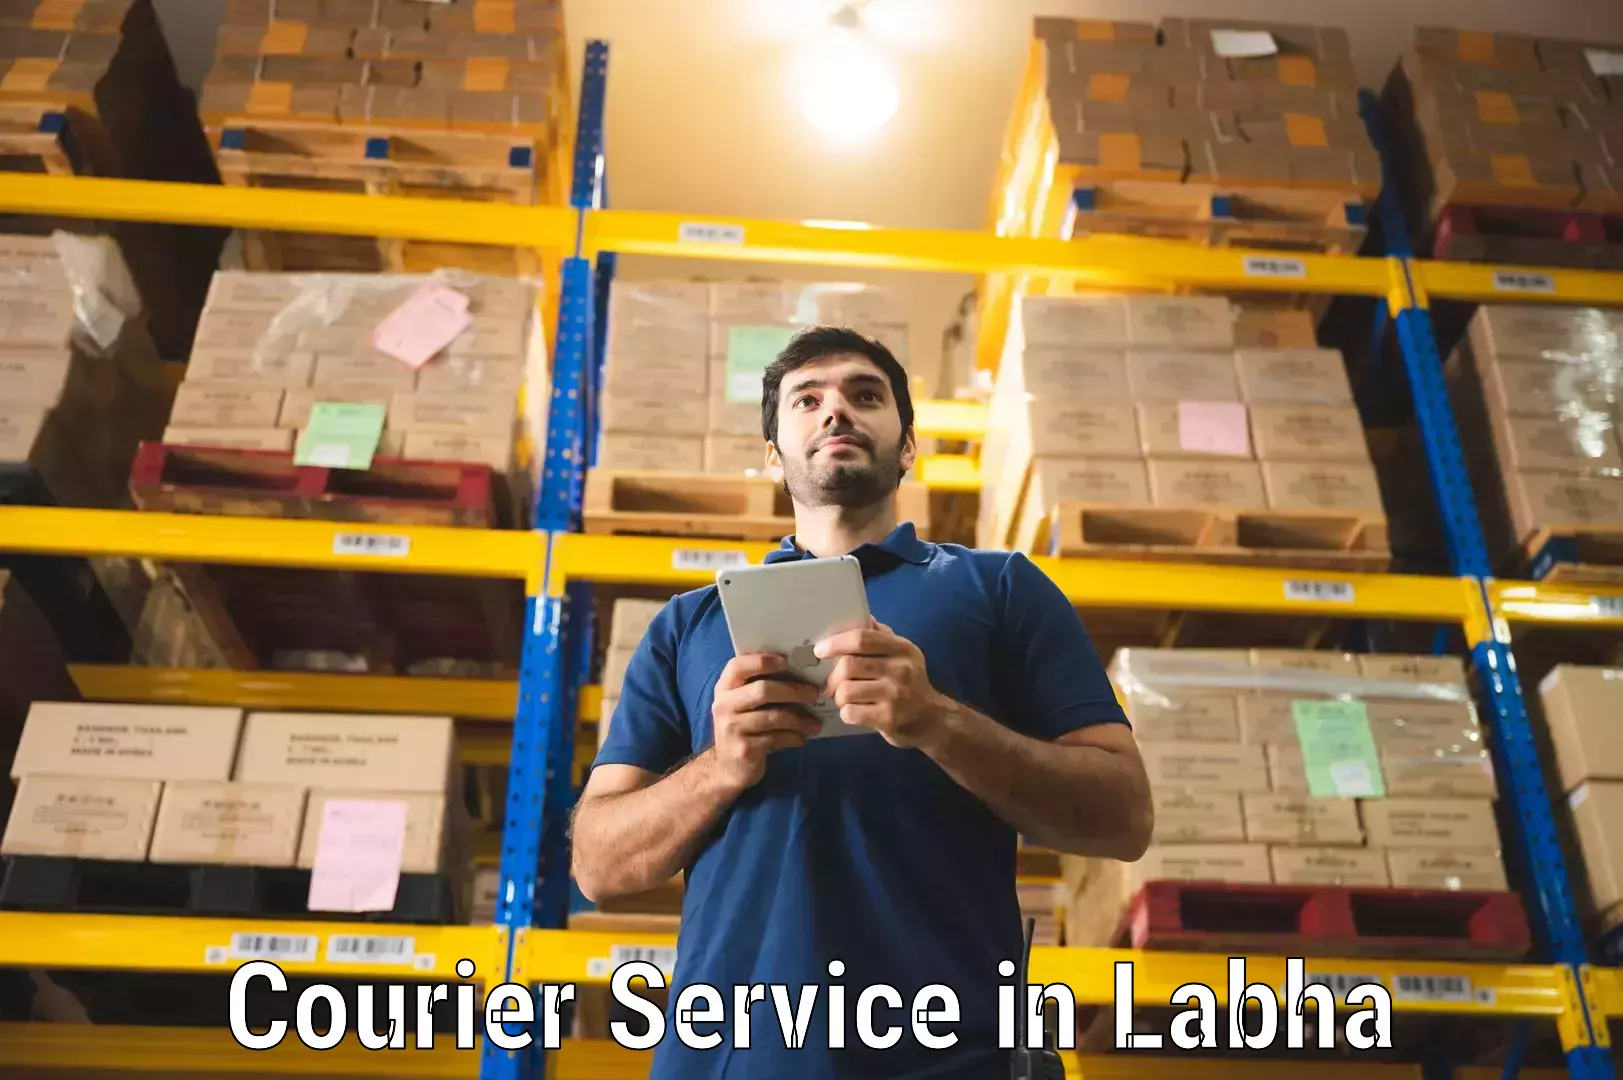 Efficient package consolidation in Labha